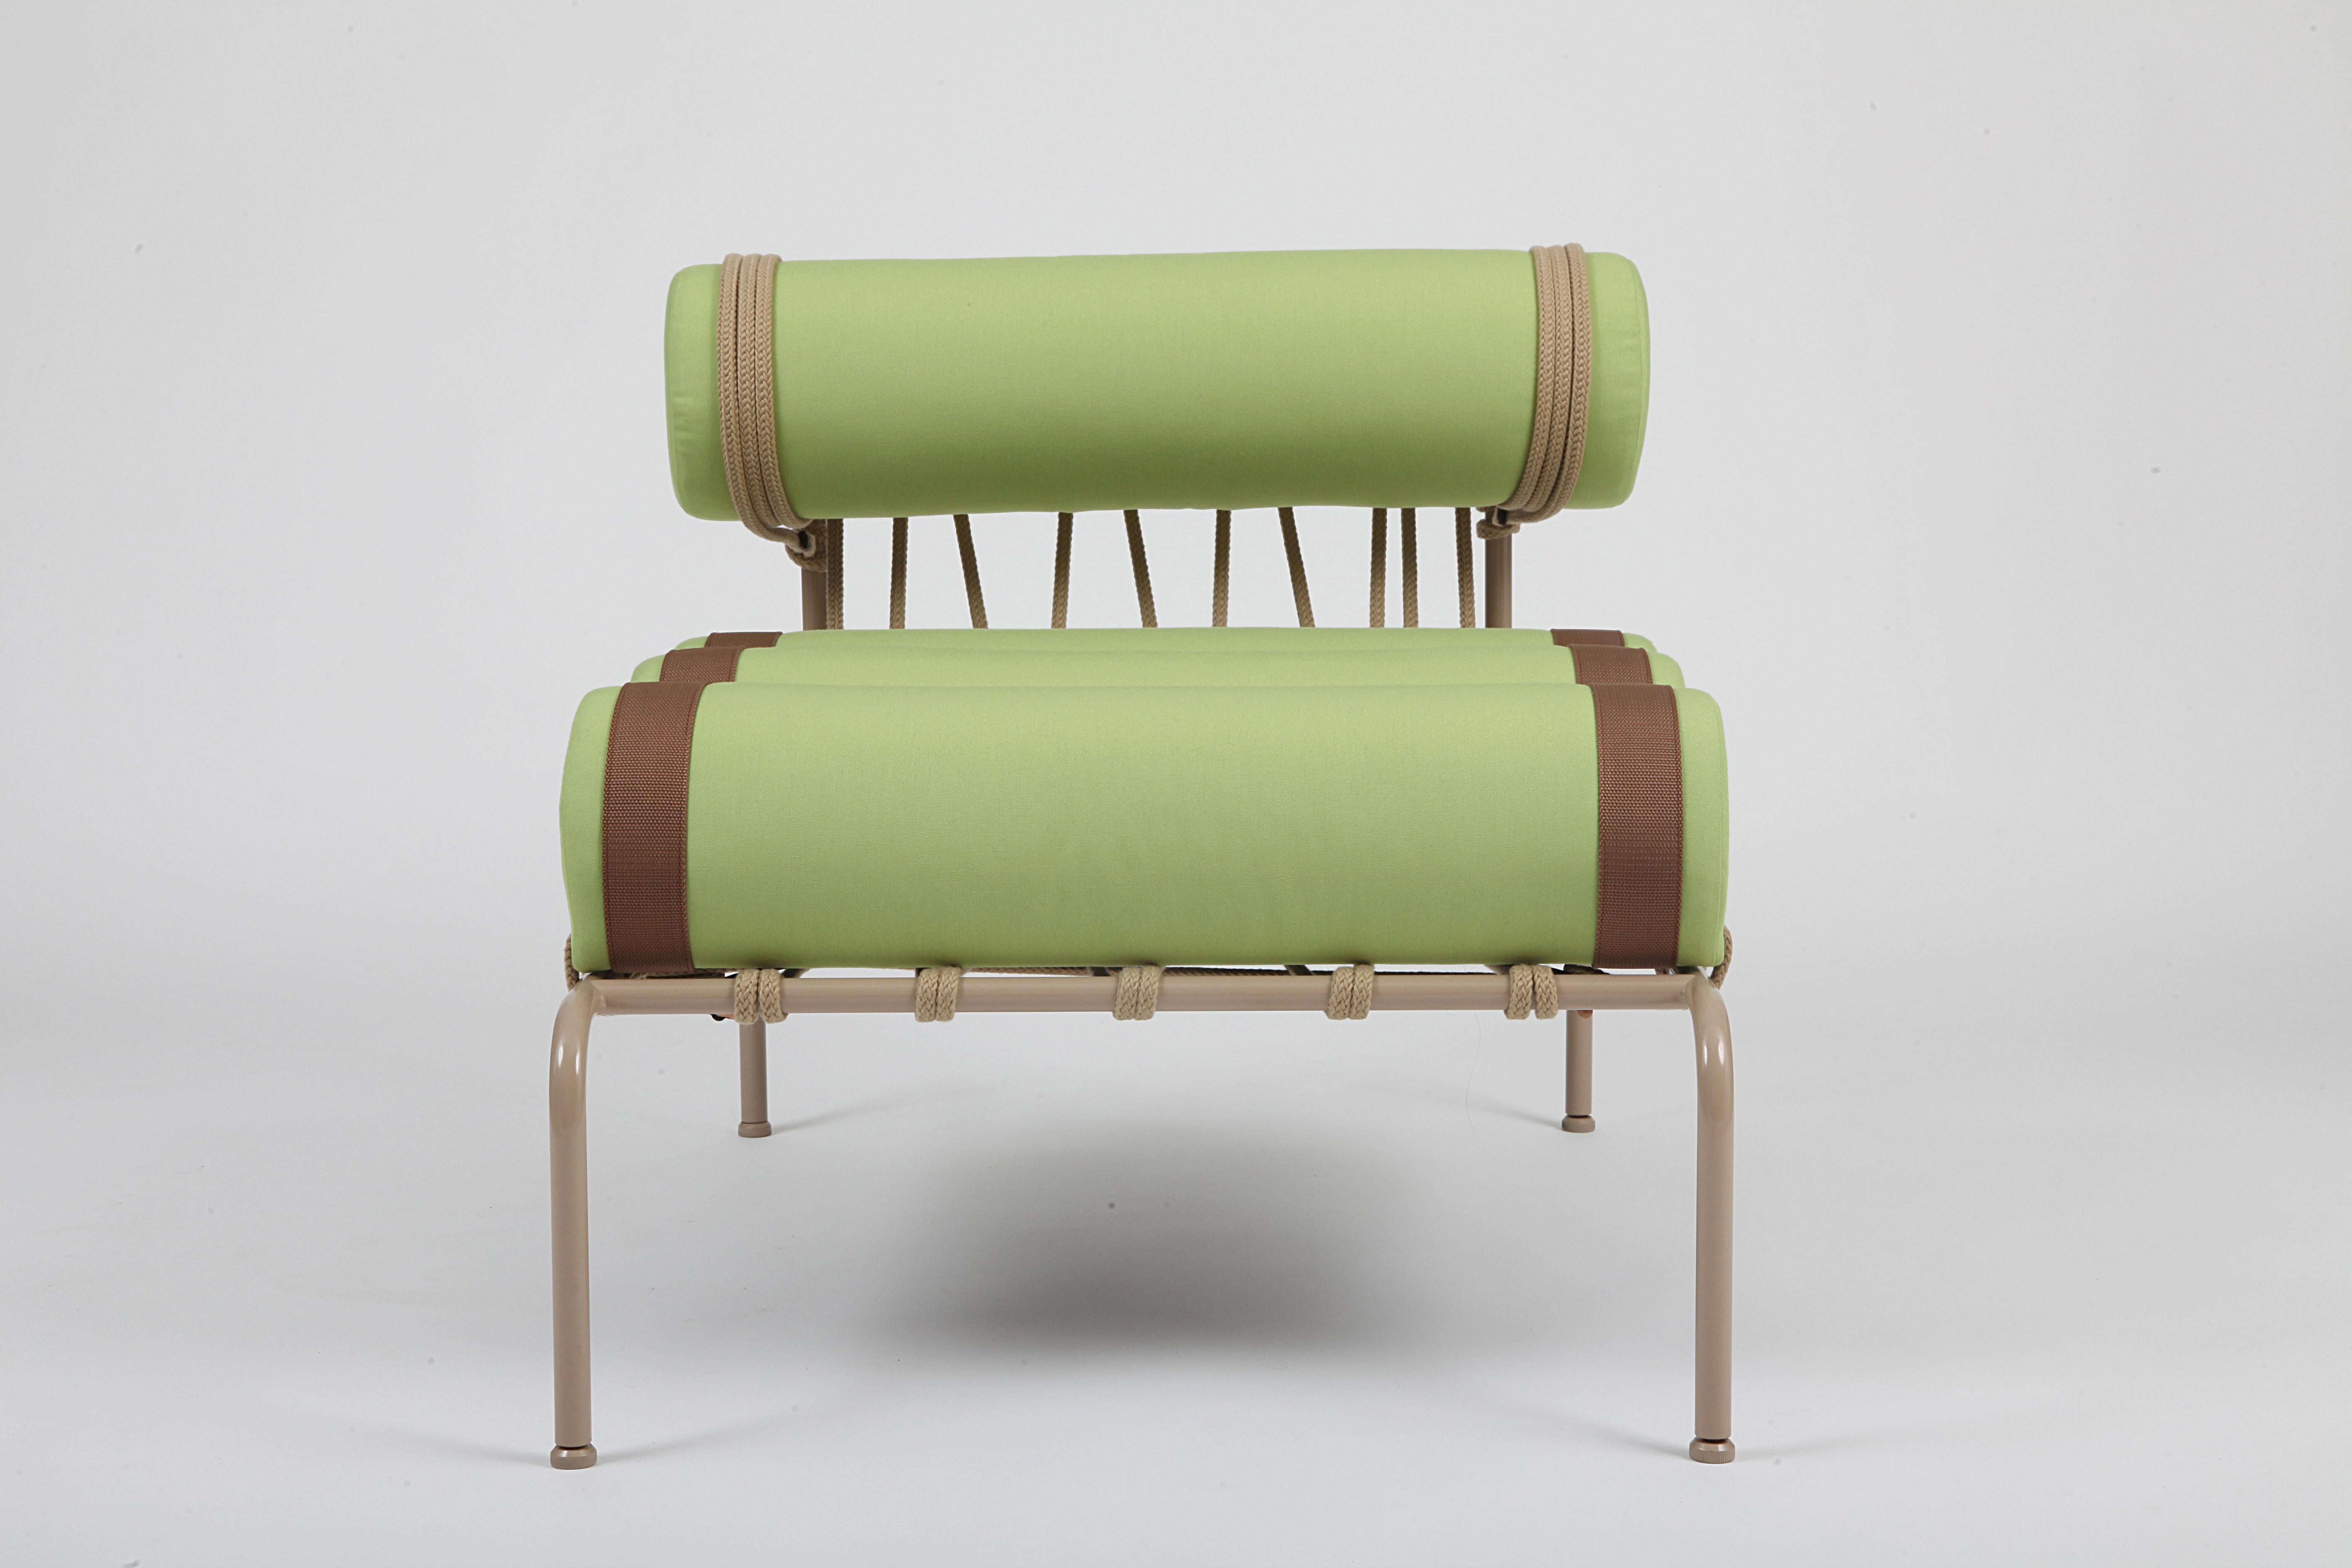 Verde Oasi Plain Kylíndo Outdoor Armchair by Dalmoto
Dimensions: D 92 x W 67 x H 69 cm. SH: 40 cm.
Materials: Metal, upholstery and rope.
Finish: RAL 9002 semiopaco metal,  Ecru rope, Verde Oasi Plain upholstery and Tabacco bands.

Available in